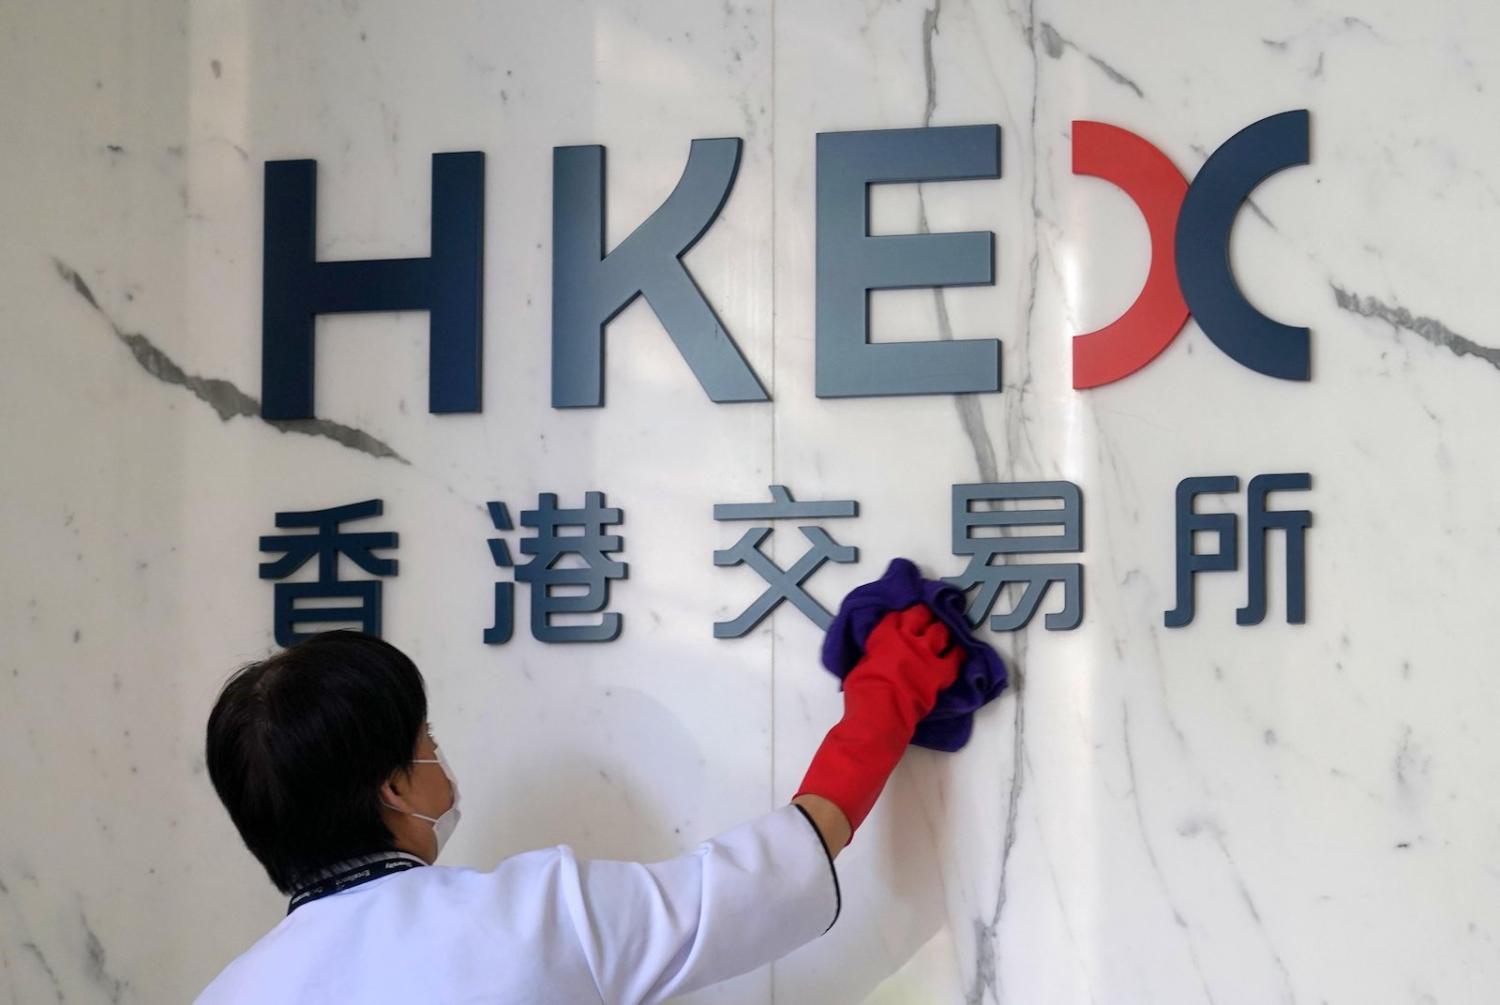 A worker cleans the logo of Hong Kong Exchanges and Clearing (HKEX), June 2020 (Zhang Wei/China News Service via Getty Images)